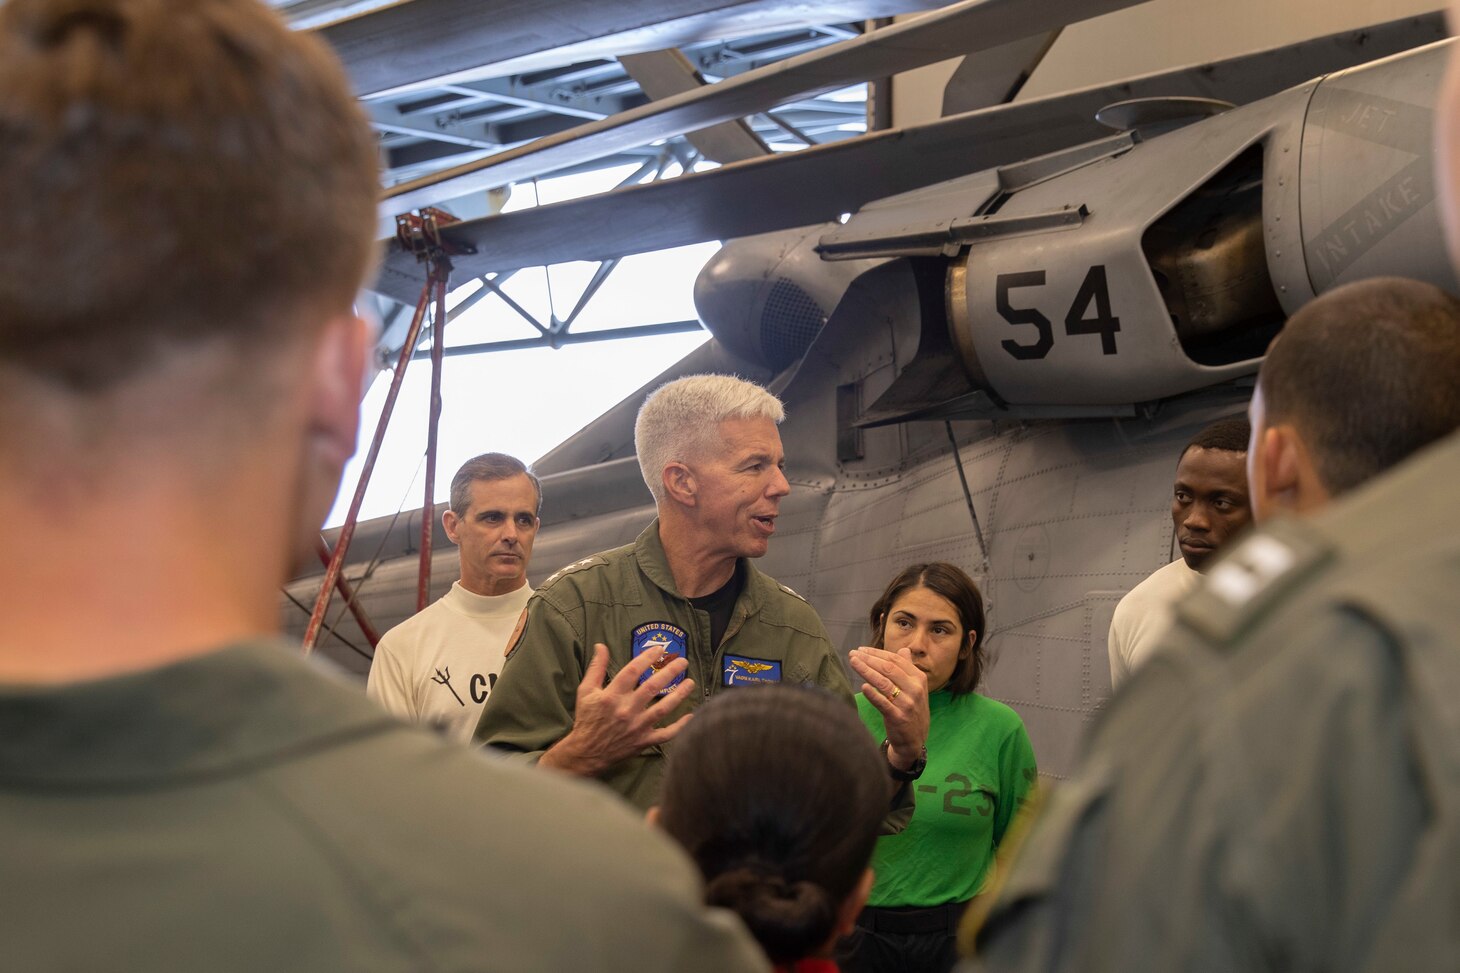 PACIFIC OCEAN (June 16, 2022) – Vice Adm. Karl Thomas, Commander, U.S. 7th Fleet, center, speaks with Sailors assigned to Helicopter Sea Combat Squadron (HSC) 23 in the hangar bay aboard amphibious assault carrier USS Tripoli (LHA 7), June 16, 2022. Tripoli is operating in the U.S. 7th Fleet area of operations to enhance interoperability with allies and partners and serve as a ready response force to defend peace and maintain stability in the Indo-Pacific region.  (U.S. Navy photo by Mass Communication Specialist 1st Class Peter Burghart)